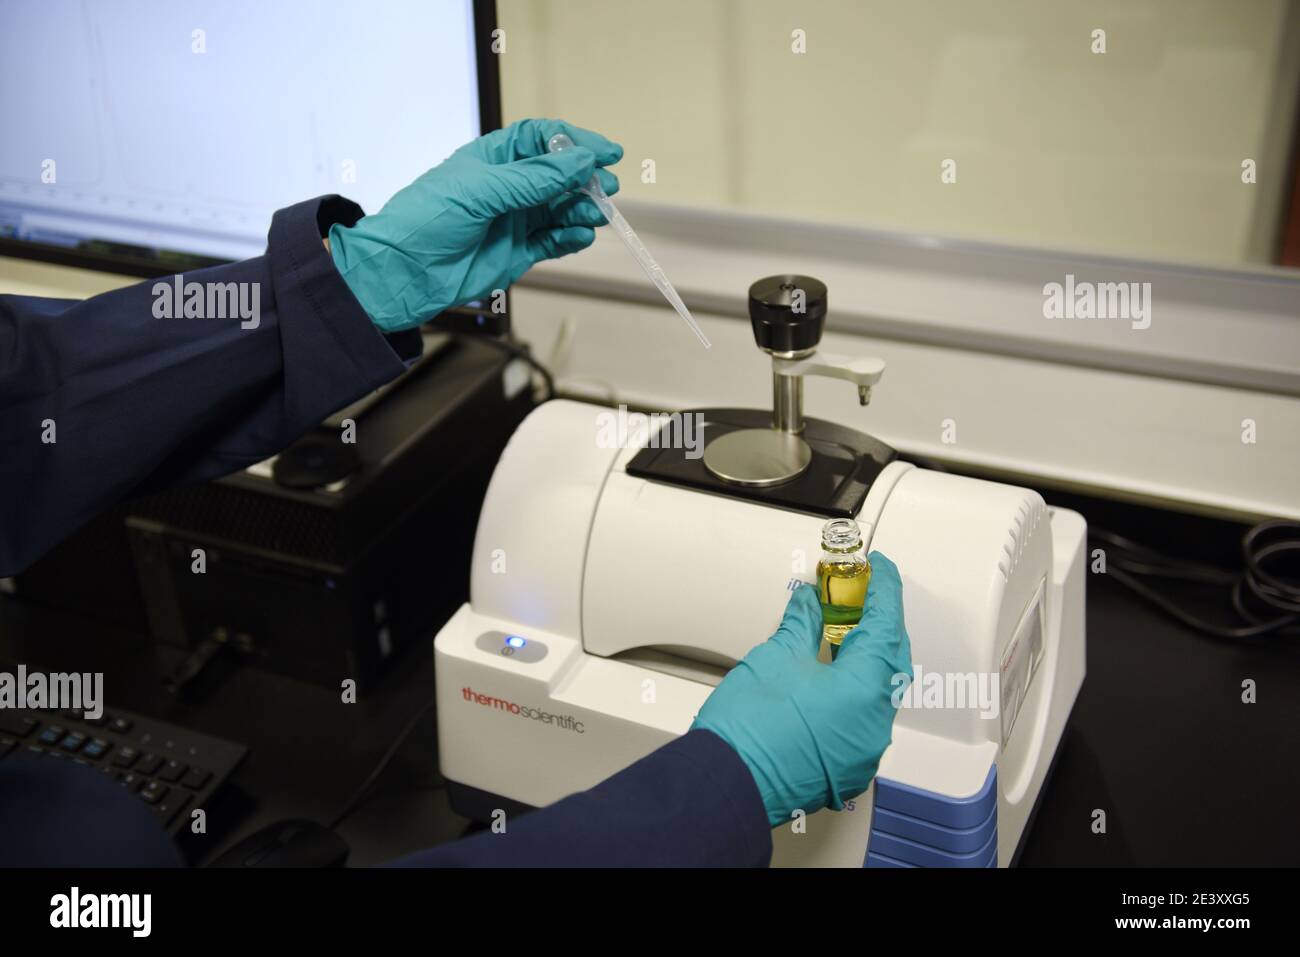 Nicolet iS5 FTIR Spectrometer provides information and for product assurance testing and material. It is designed for scientists, production managers Stock Photo